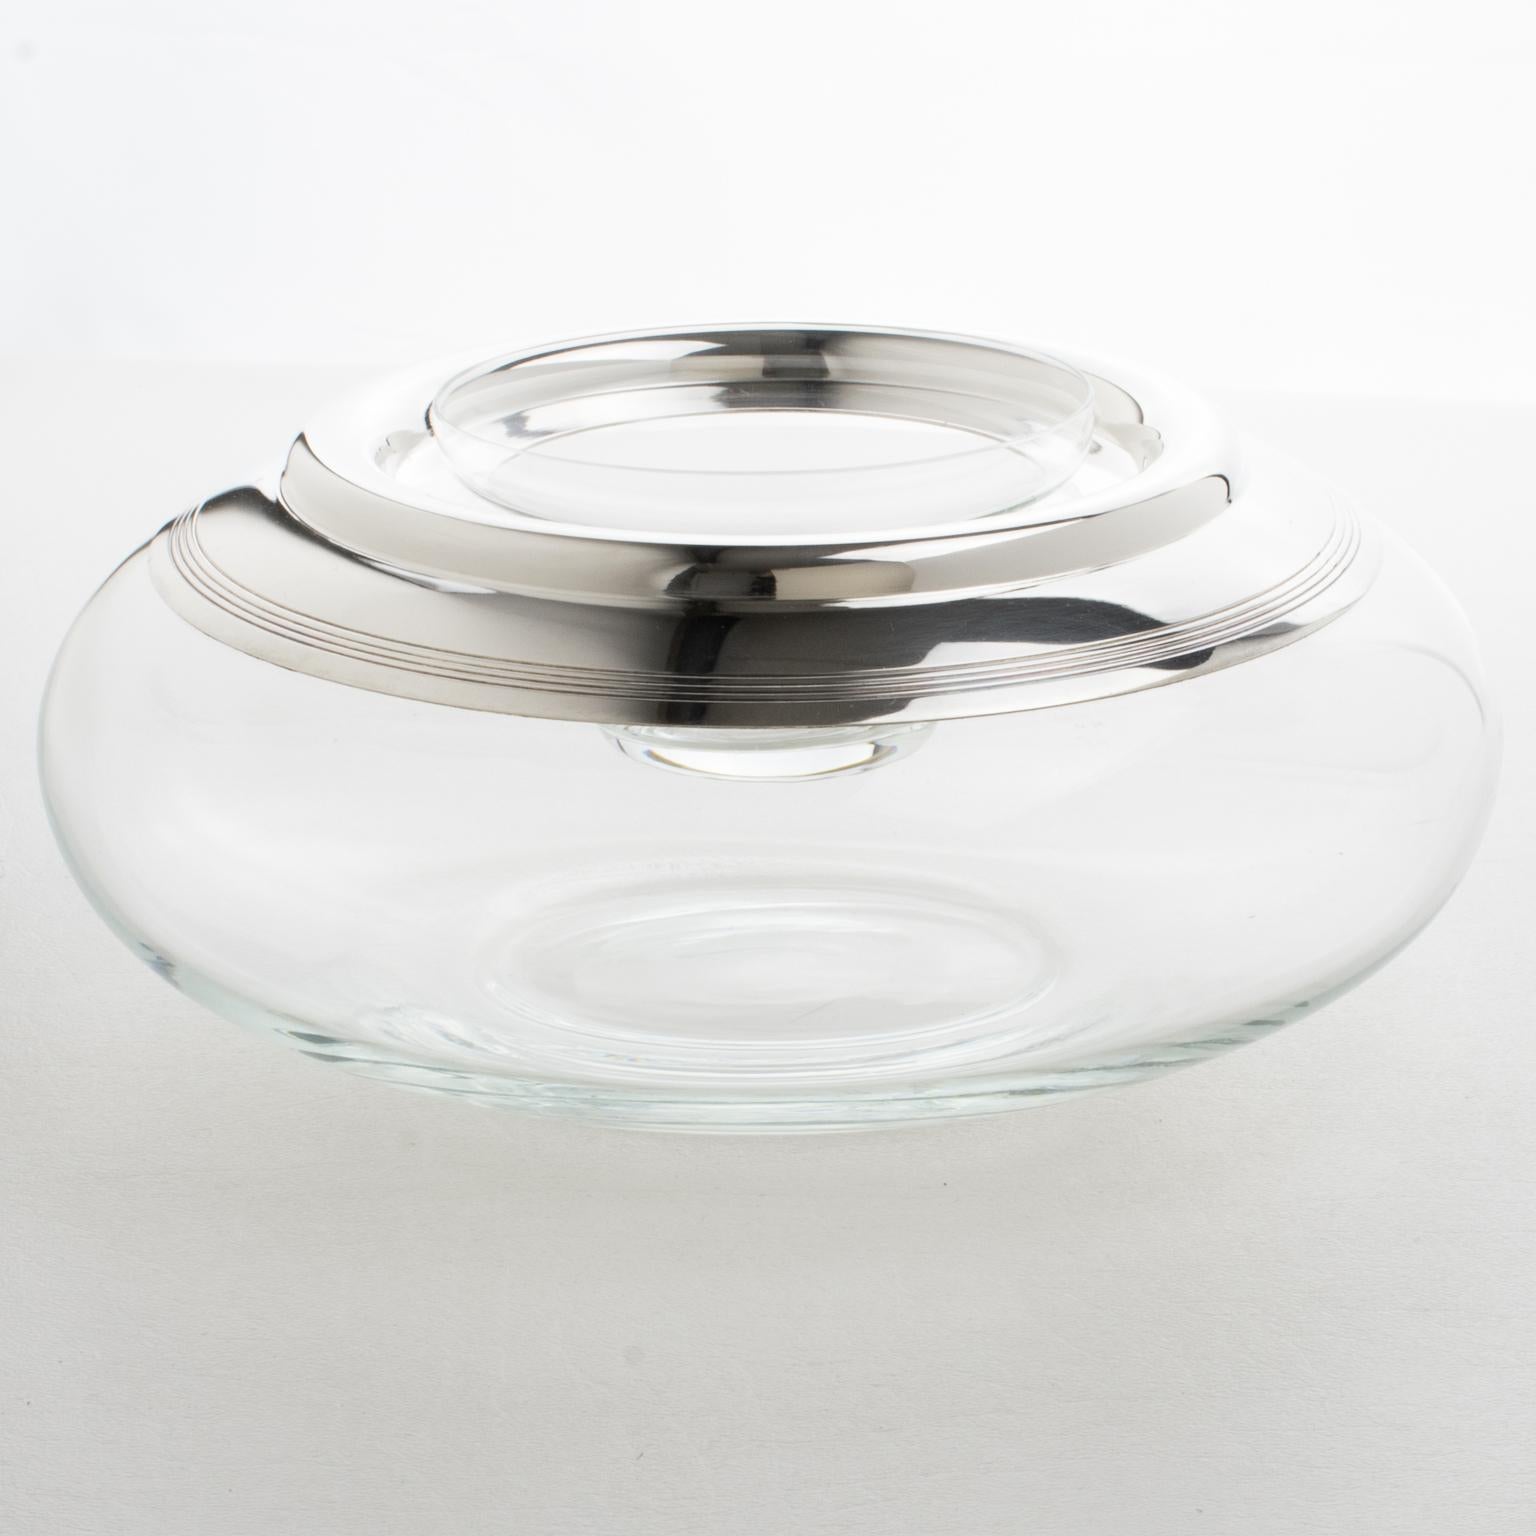 Modern Silver Plate and Crystal Caviar Bowl Dish Server by St Hilaire France, 1960s